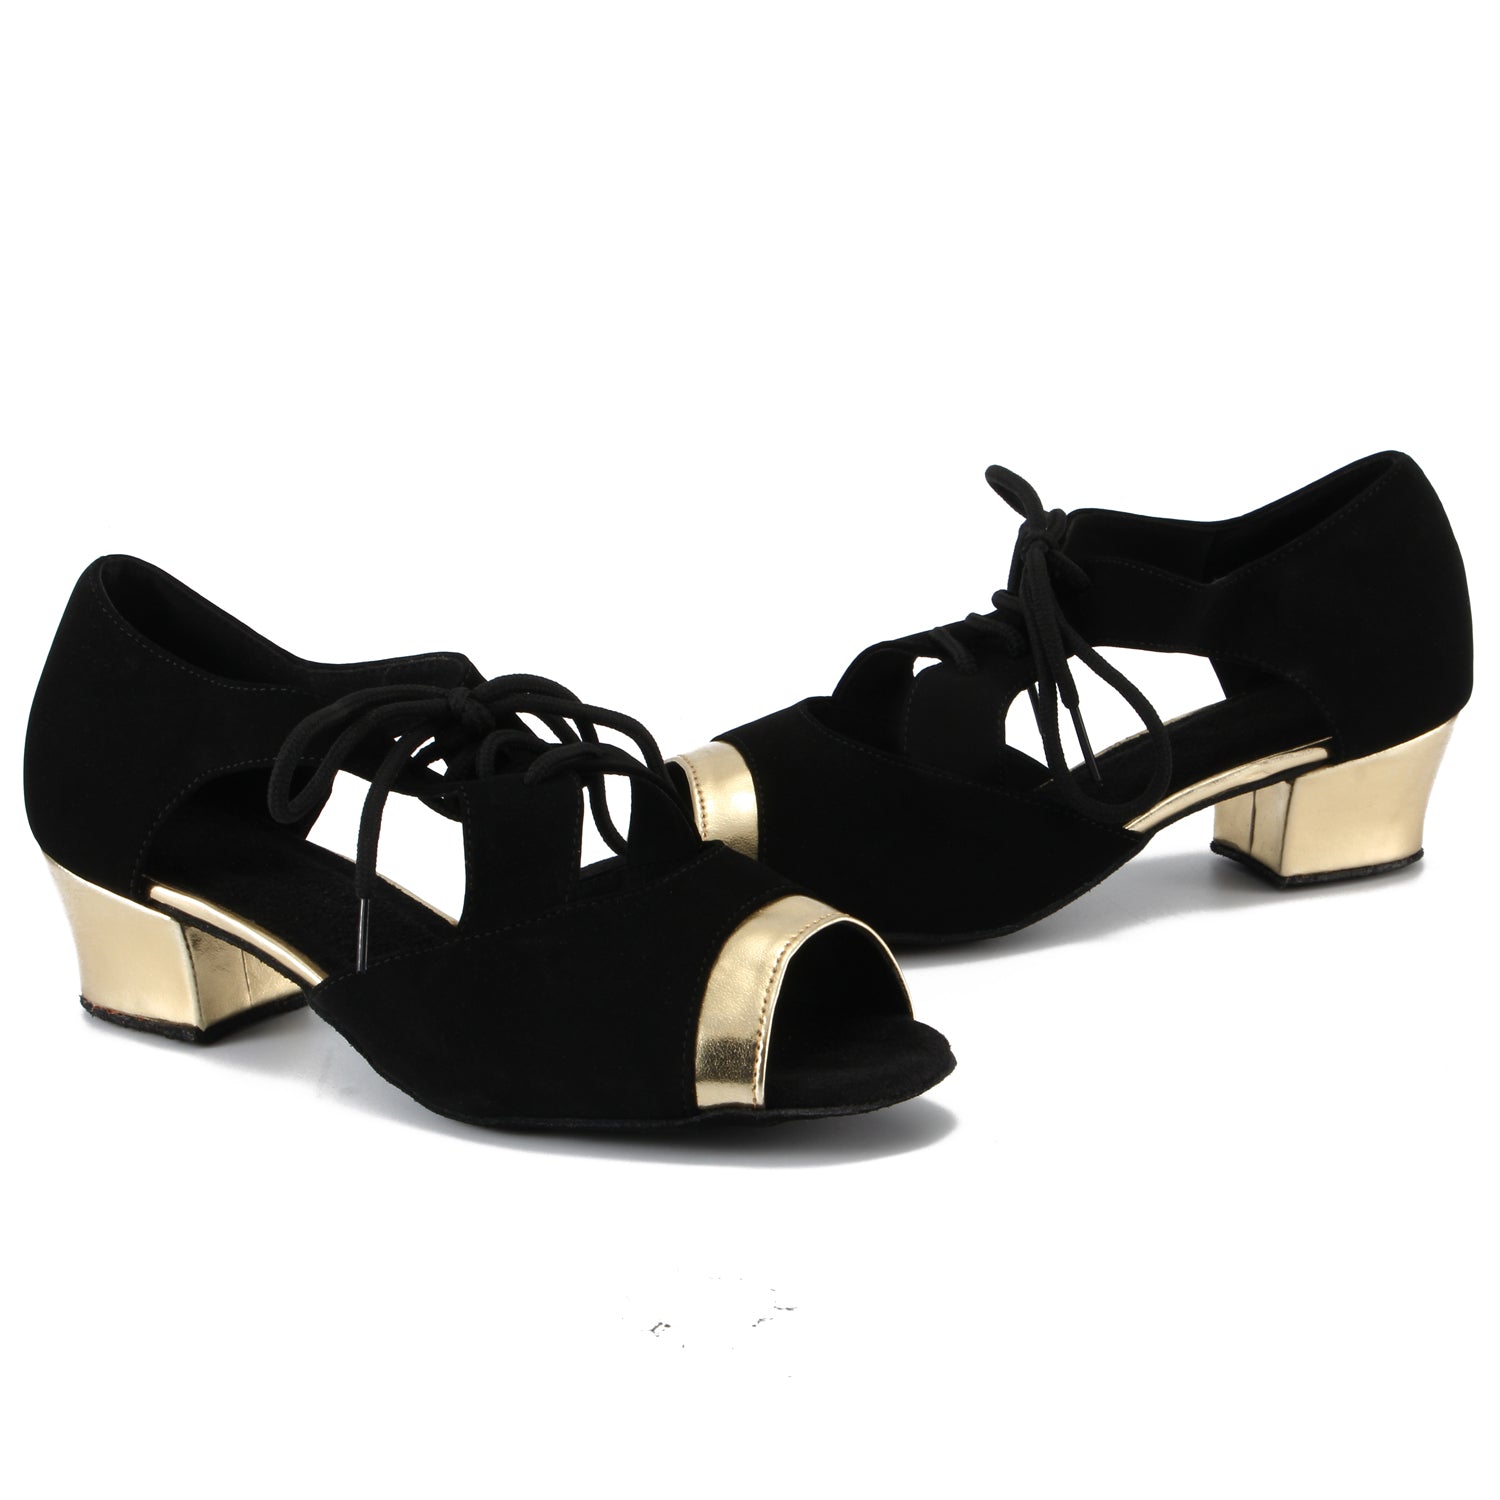 Women Ballroom Dancing Shoes with Suede Sole, Lace-up Open-toe Design in Black and Gold for Tango Latin Practice (PD-3004A)0